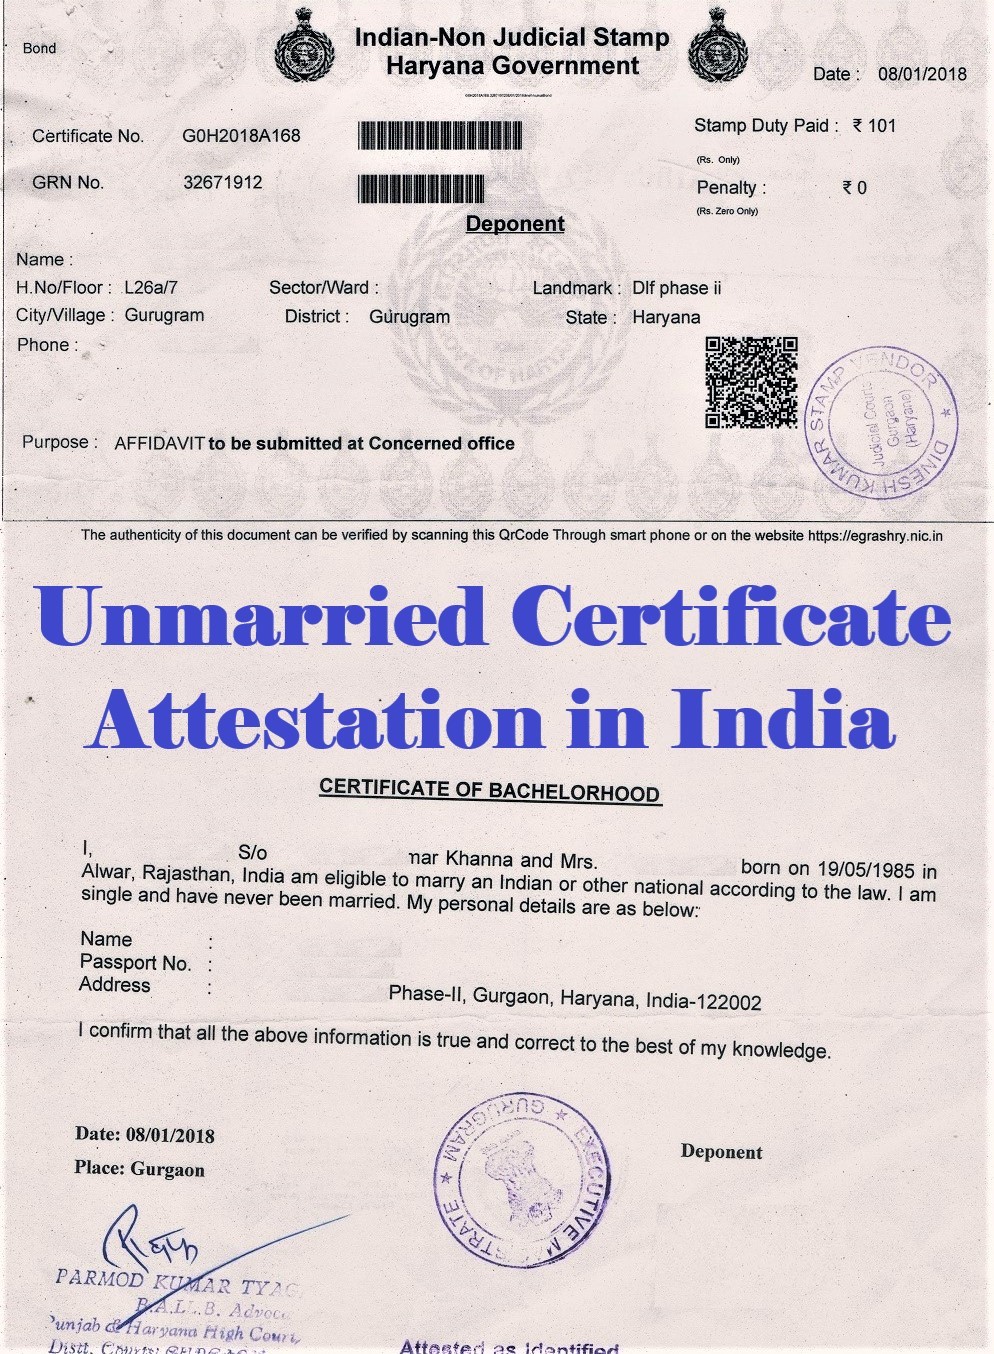 Unmarried Certificate Attestation from Bolivia Embassy